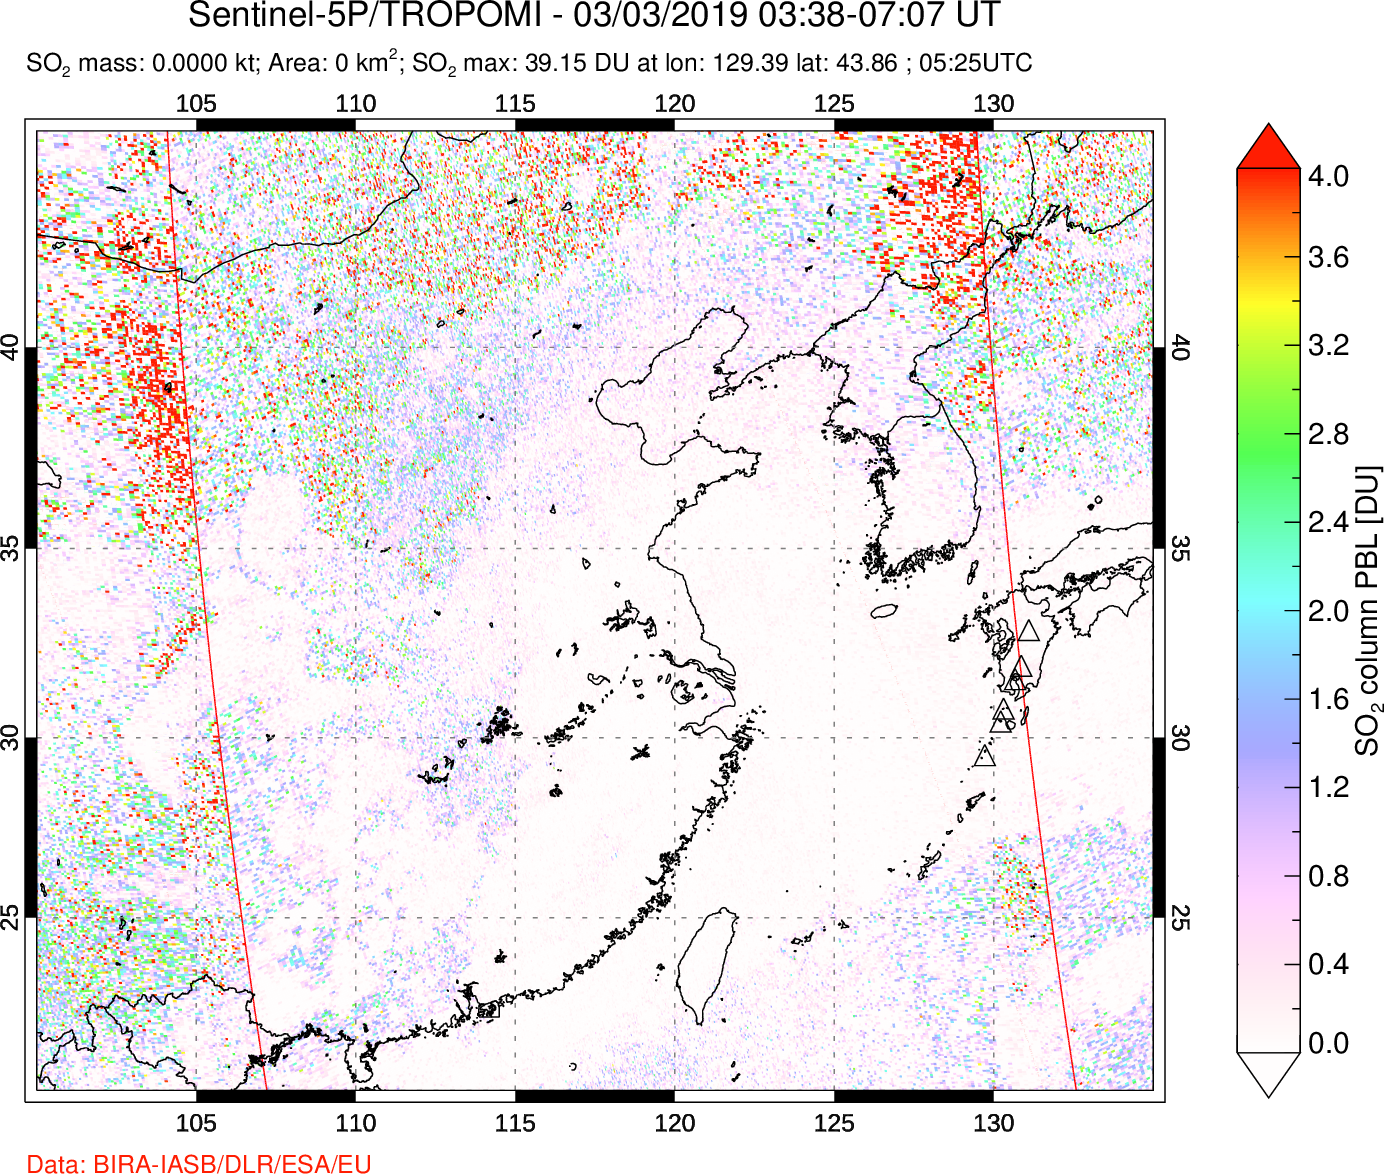 A sulfur dioxide image over Eastern China on Mar 03, 2019.